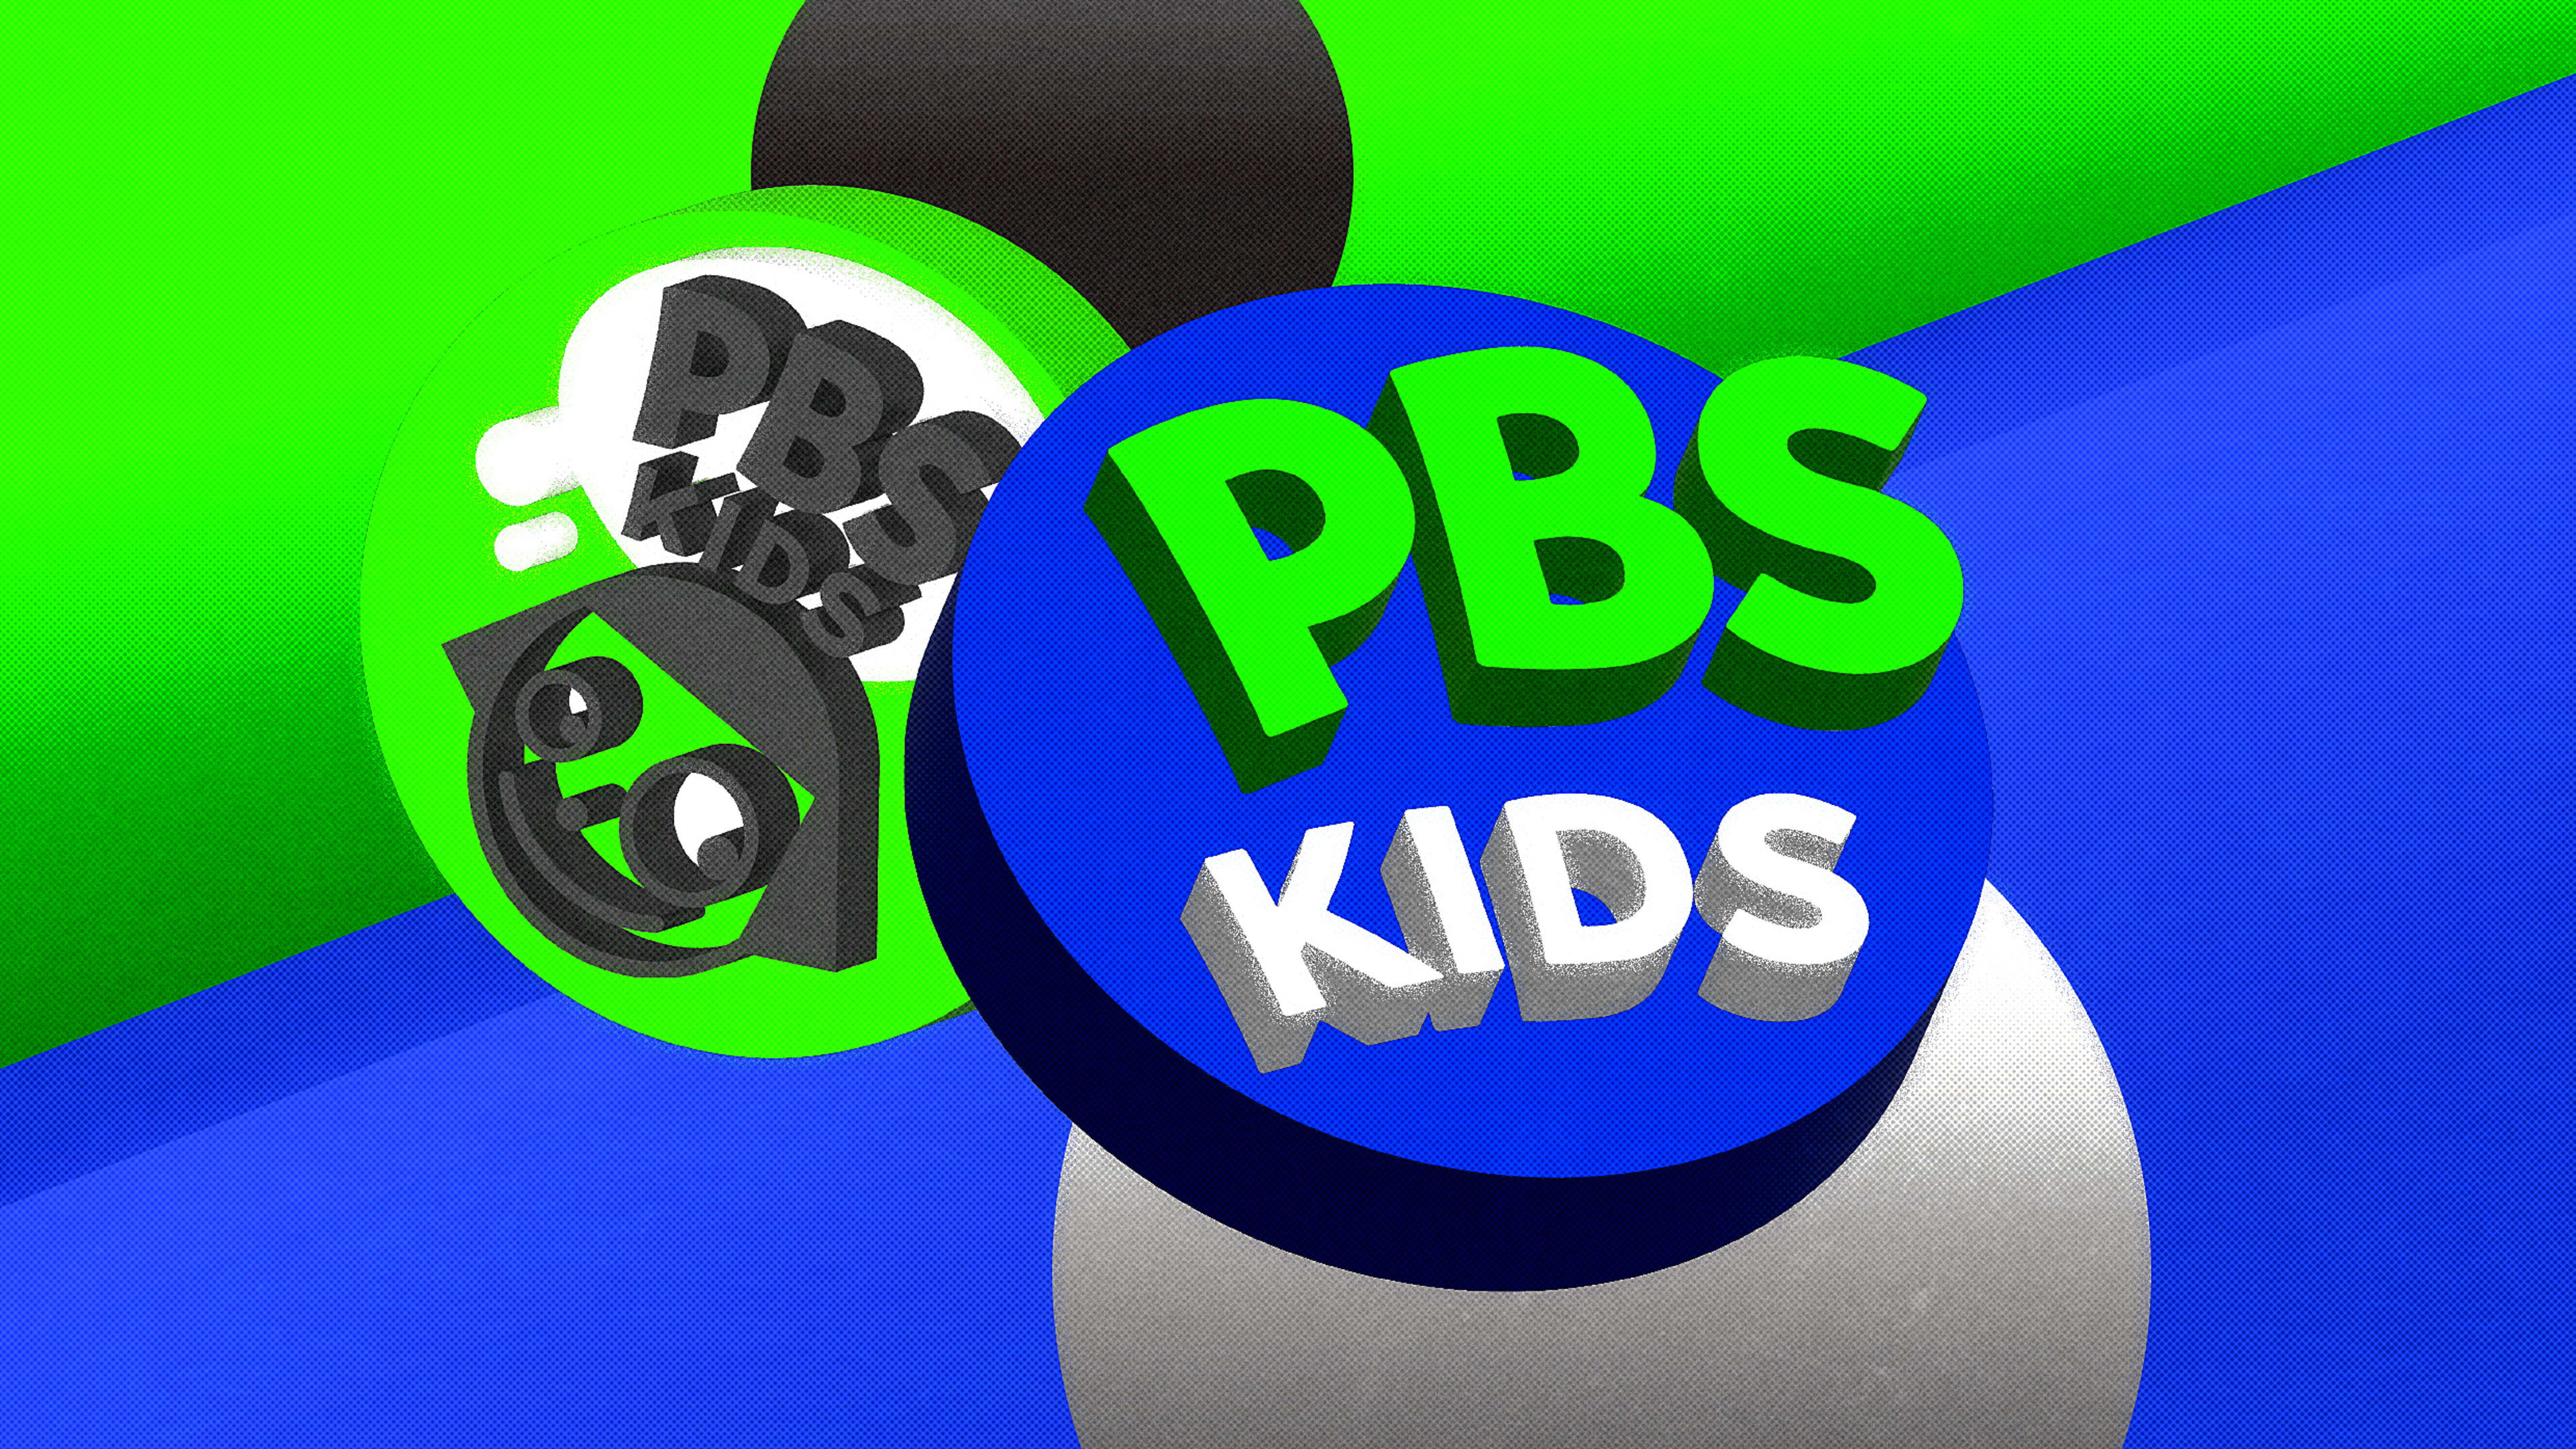 Why the new PBS Kids logo got rid of the kid